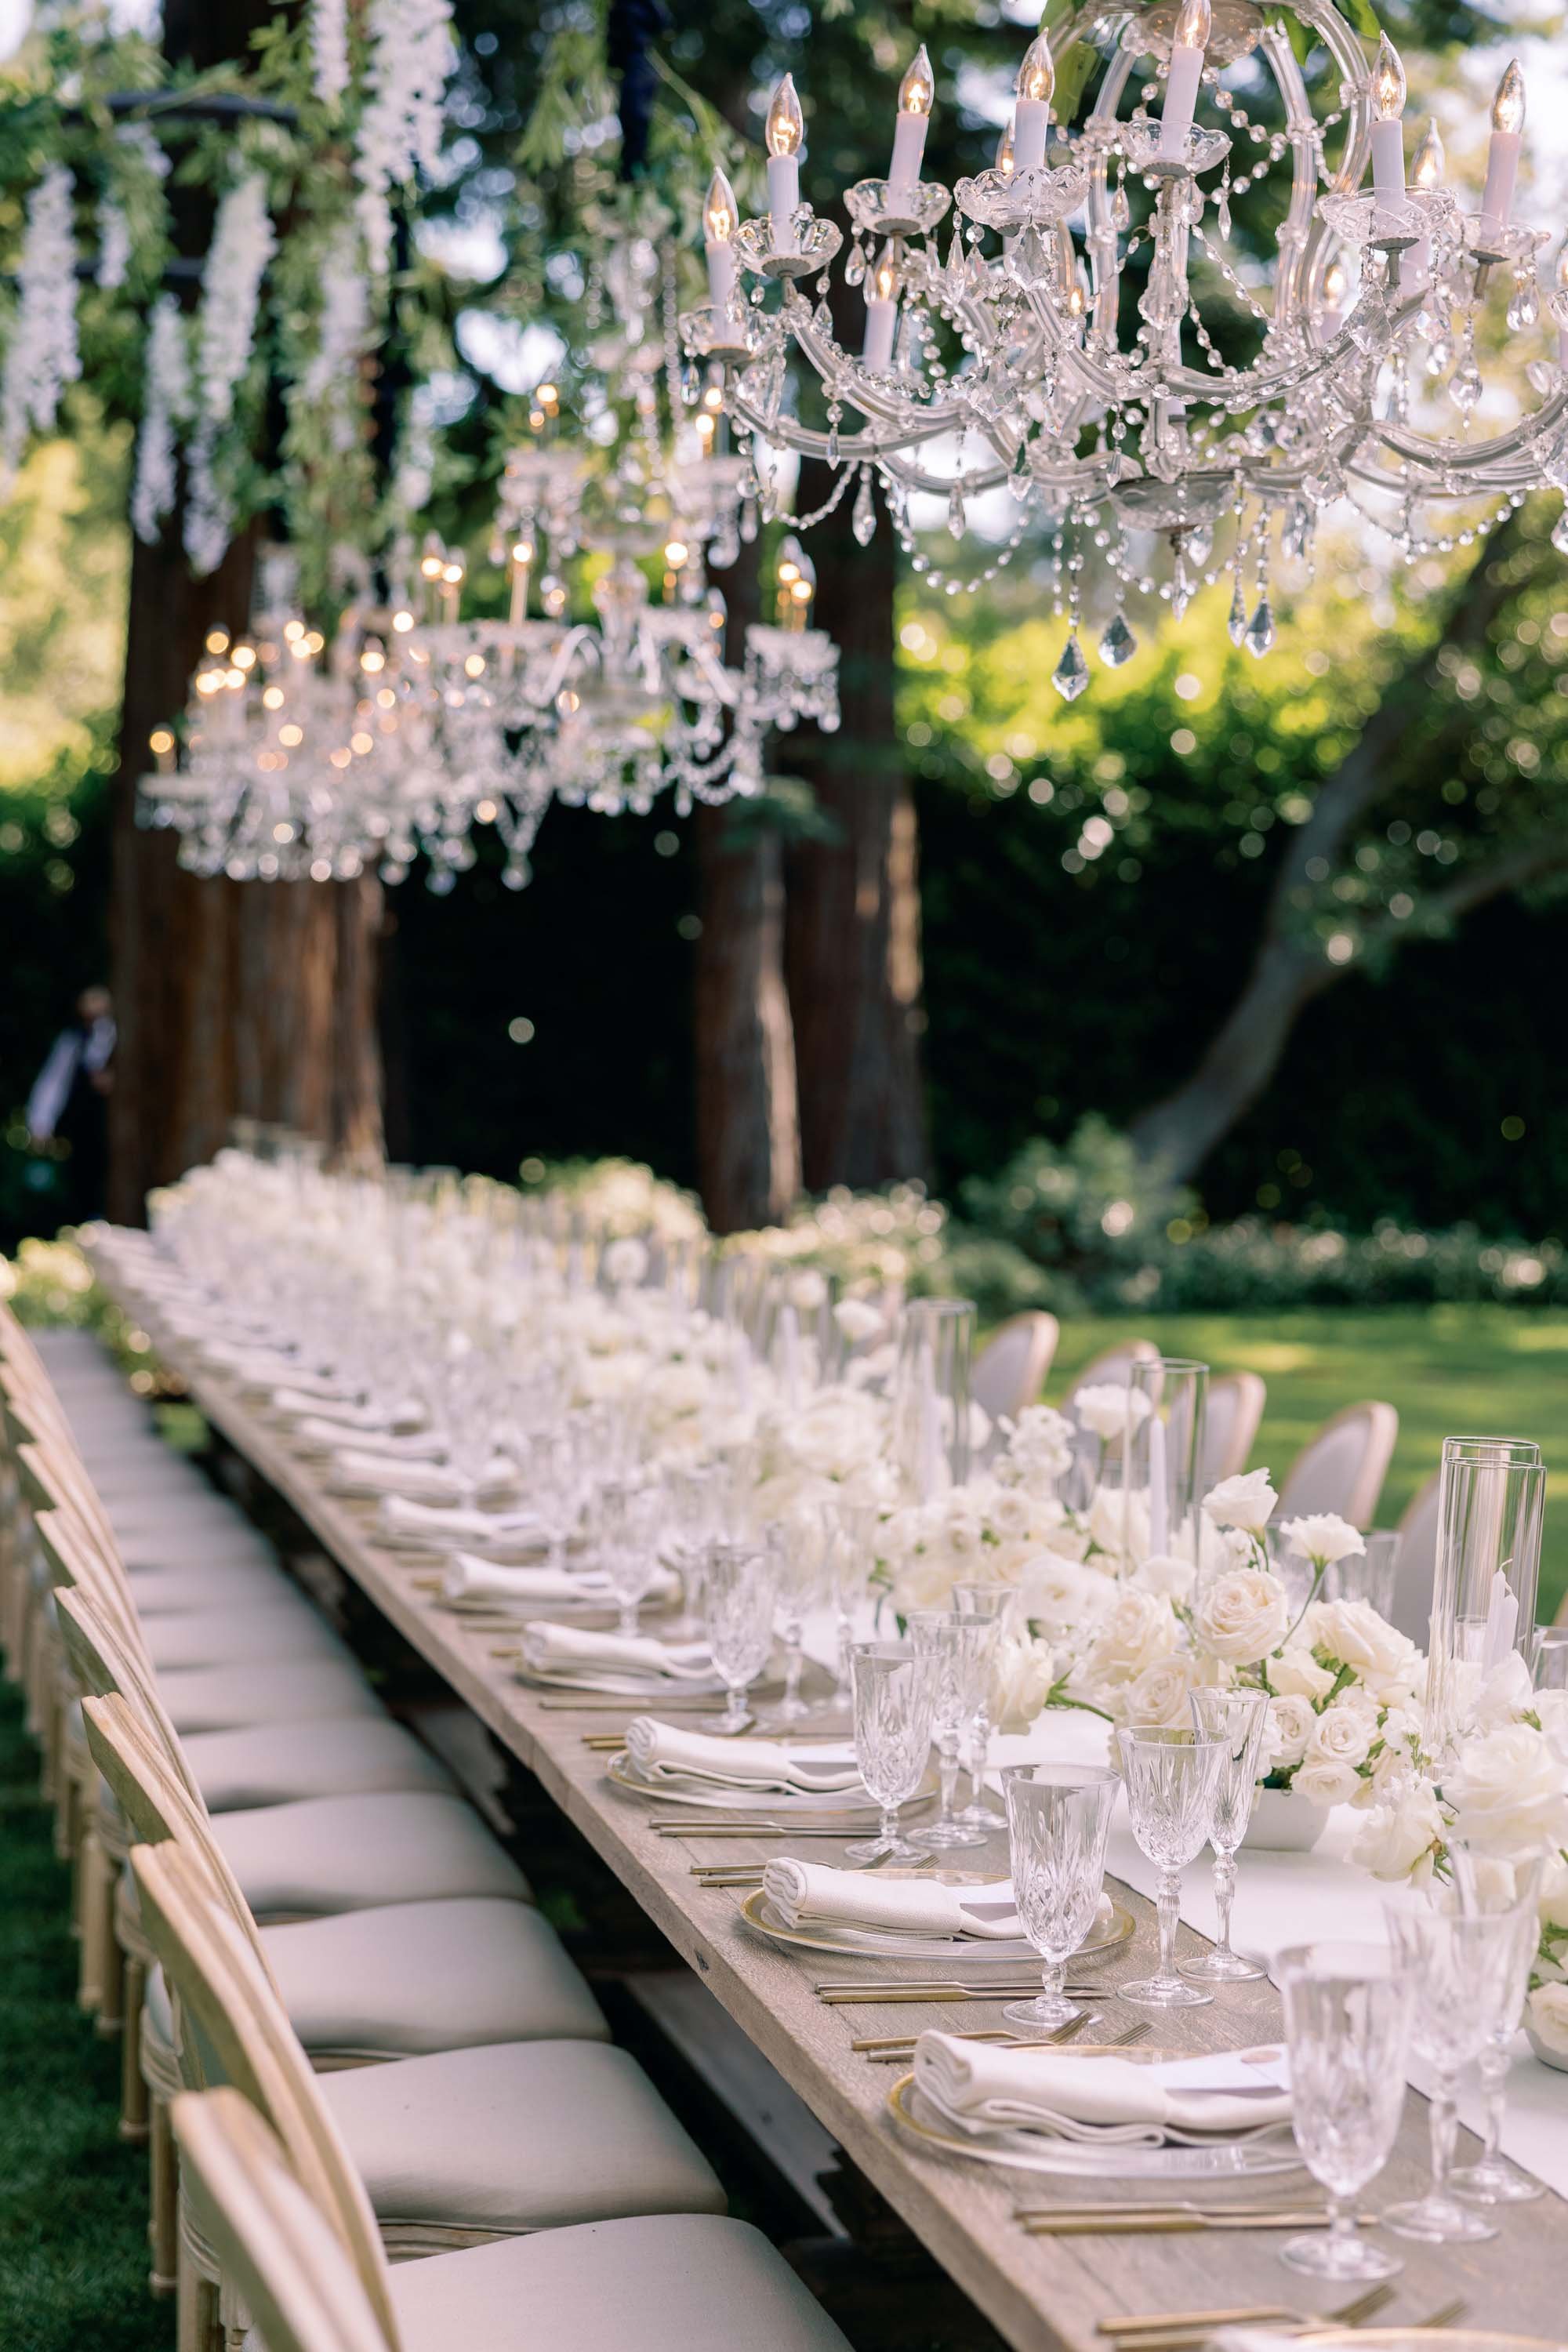 eventsbycmg.com | Events by CMG California and Destination Event Wedding Planner | Luxury Weddings  5 (1).jpg